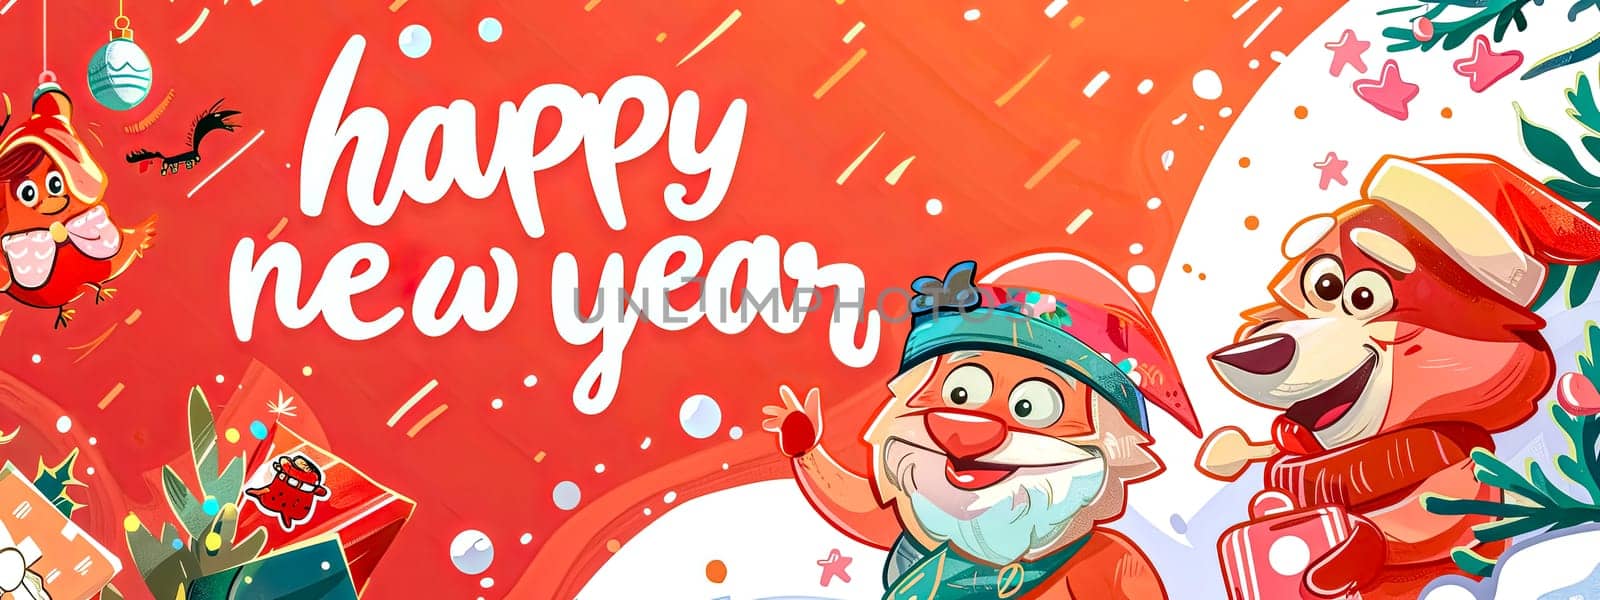 Festive new year celebration banner with cartoon characters by Edophoto